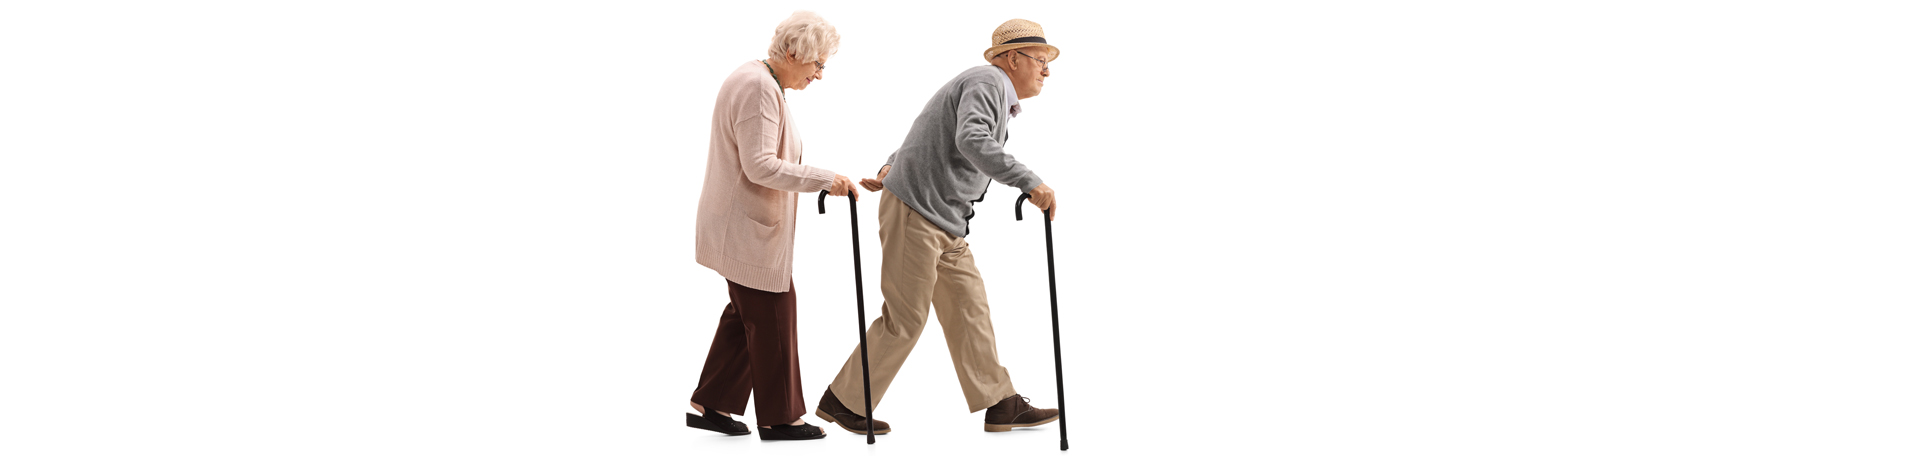 Baton Rouge back pain affects gait and walking patterns